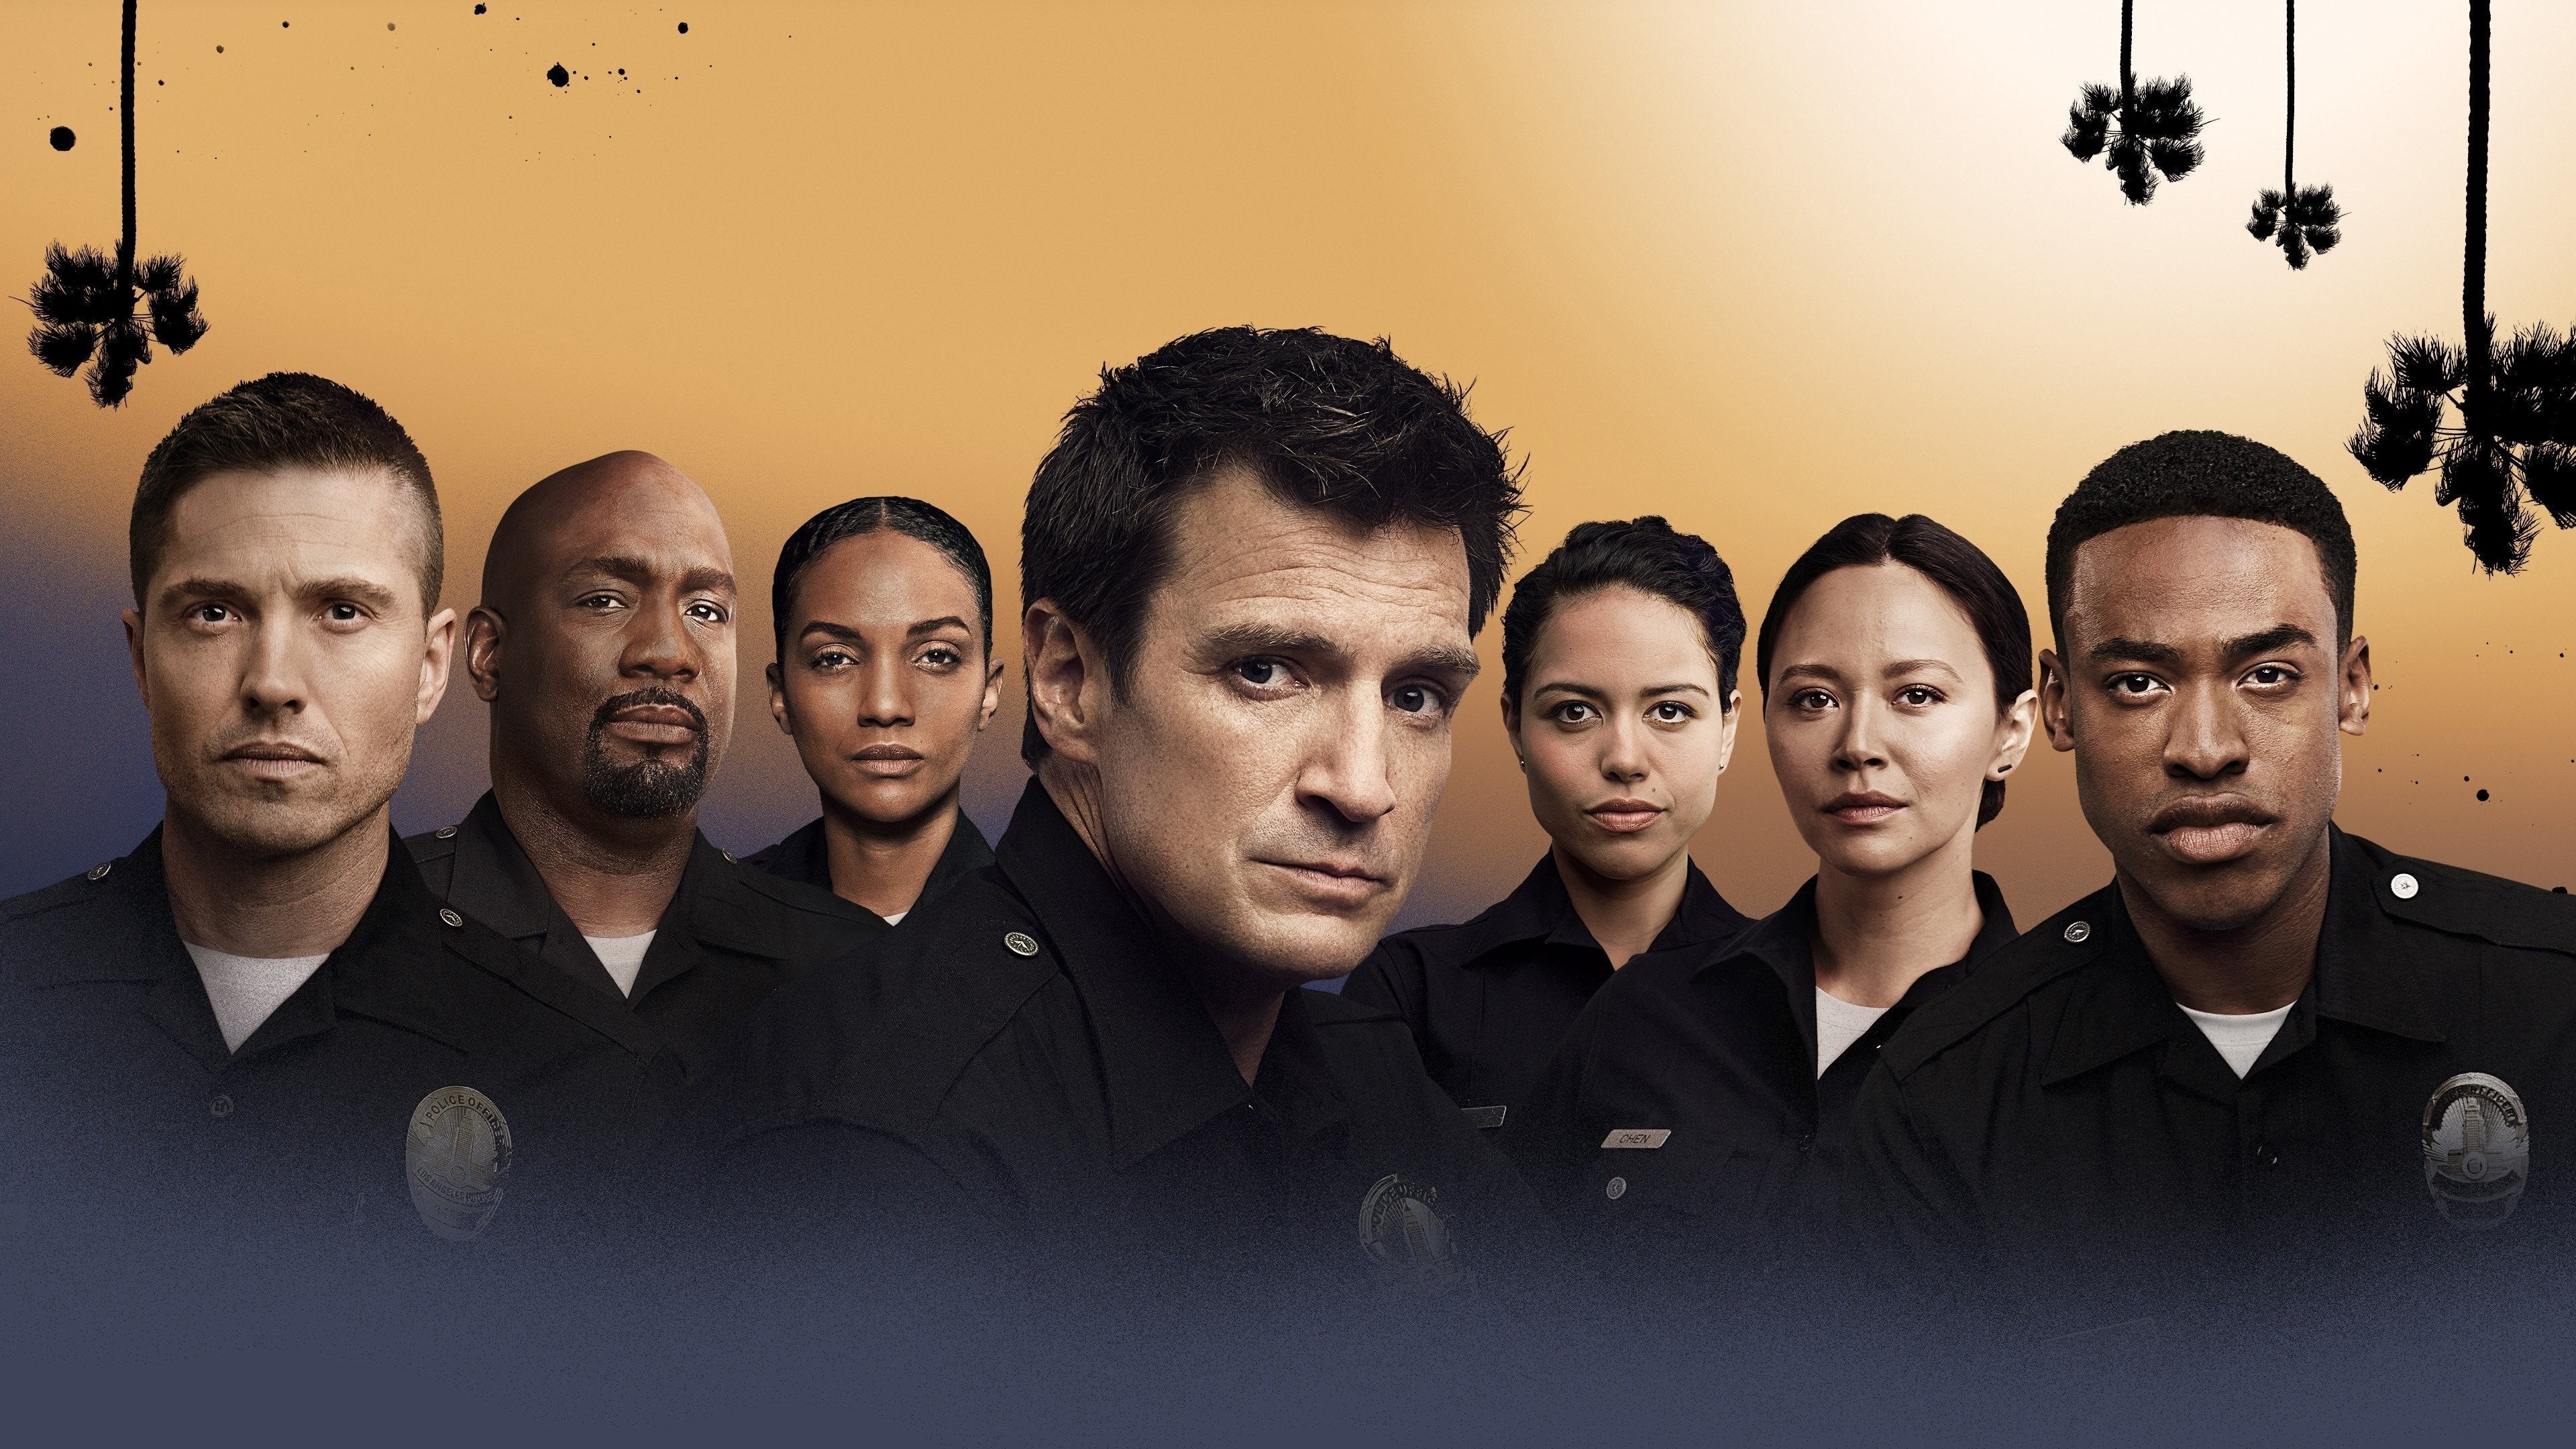 The Rookie TV Series, HD wallpapers, Exciting themes, Visual appeal, 3840x2160 4K Desktop